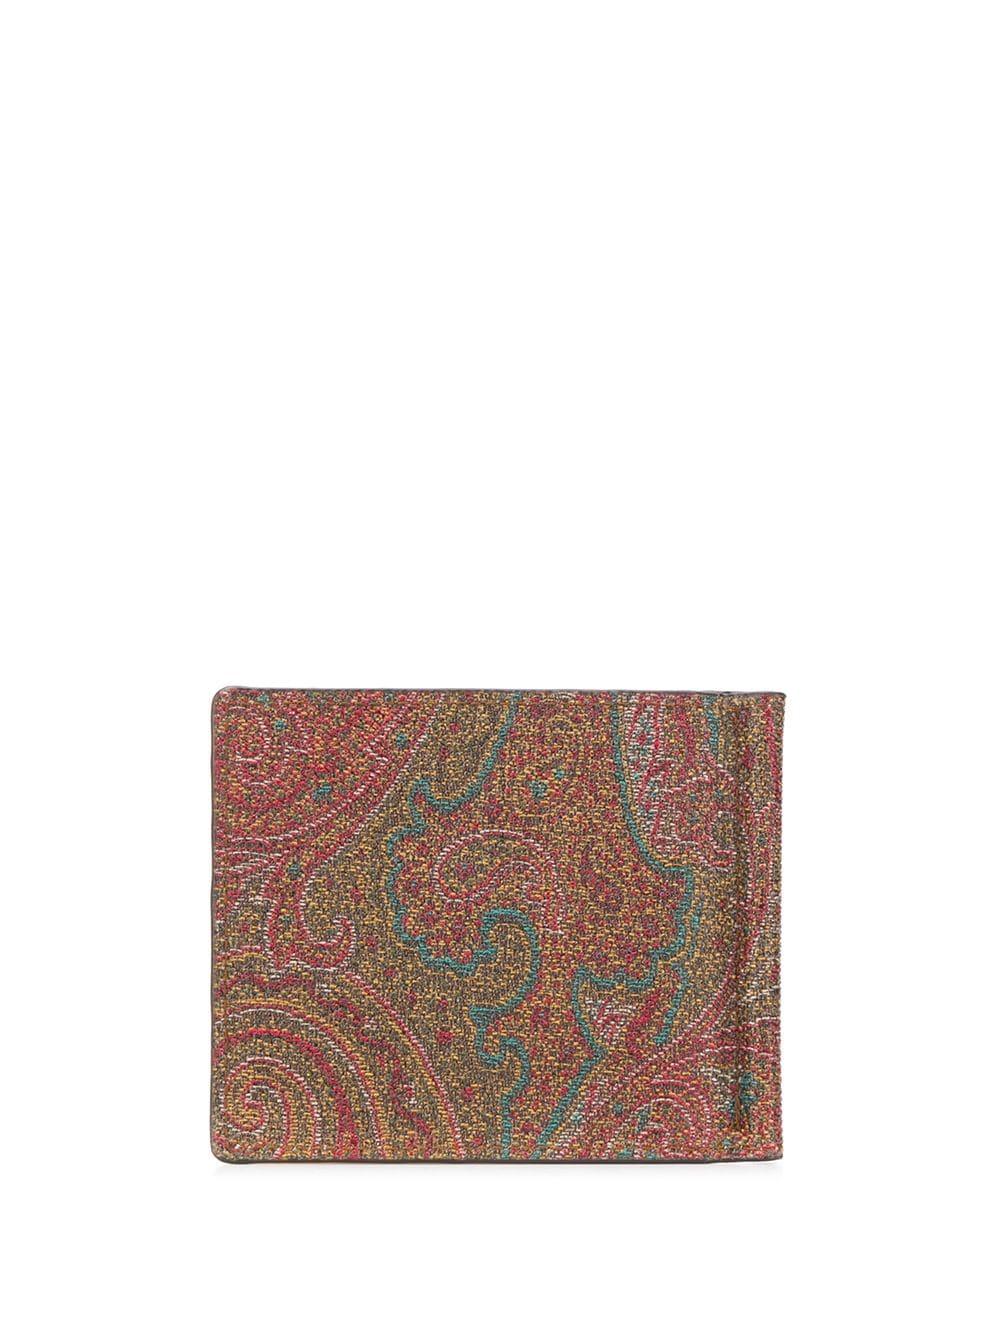 Etro Leather Paisley Print Bifold Wallet in Brown for Men - Lyst